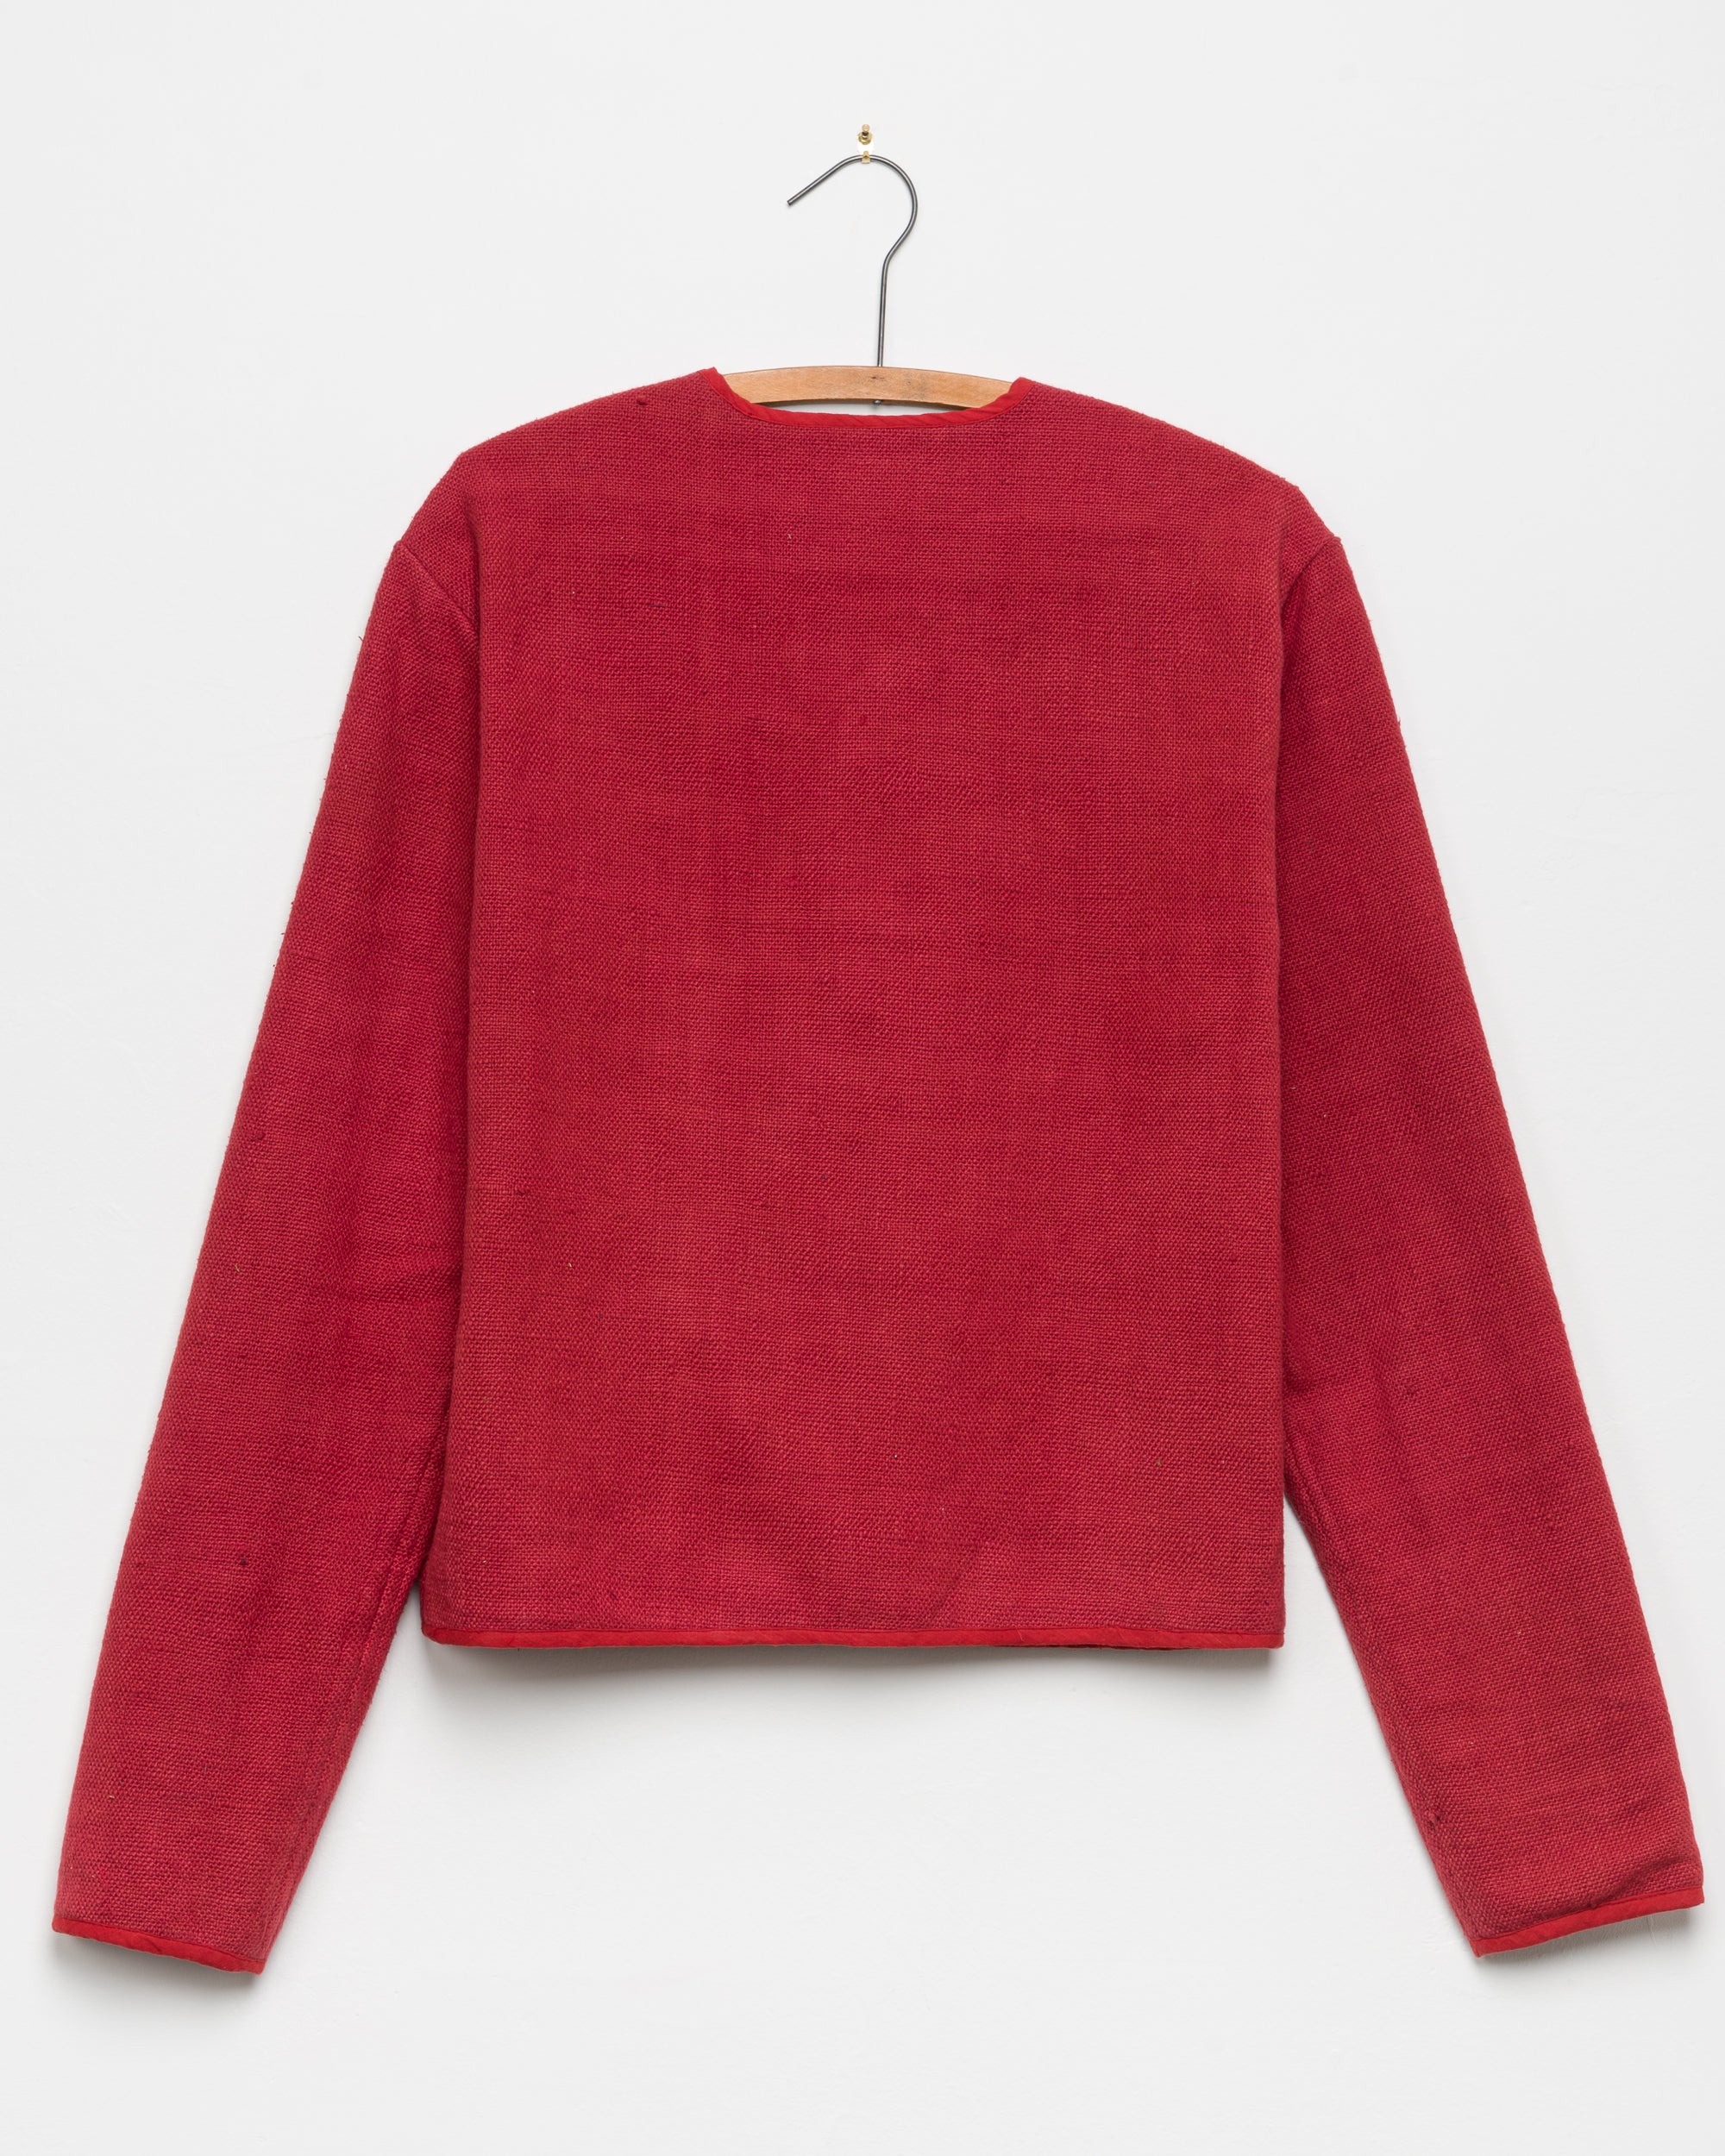 Cardigan in Red Nubby Cotton